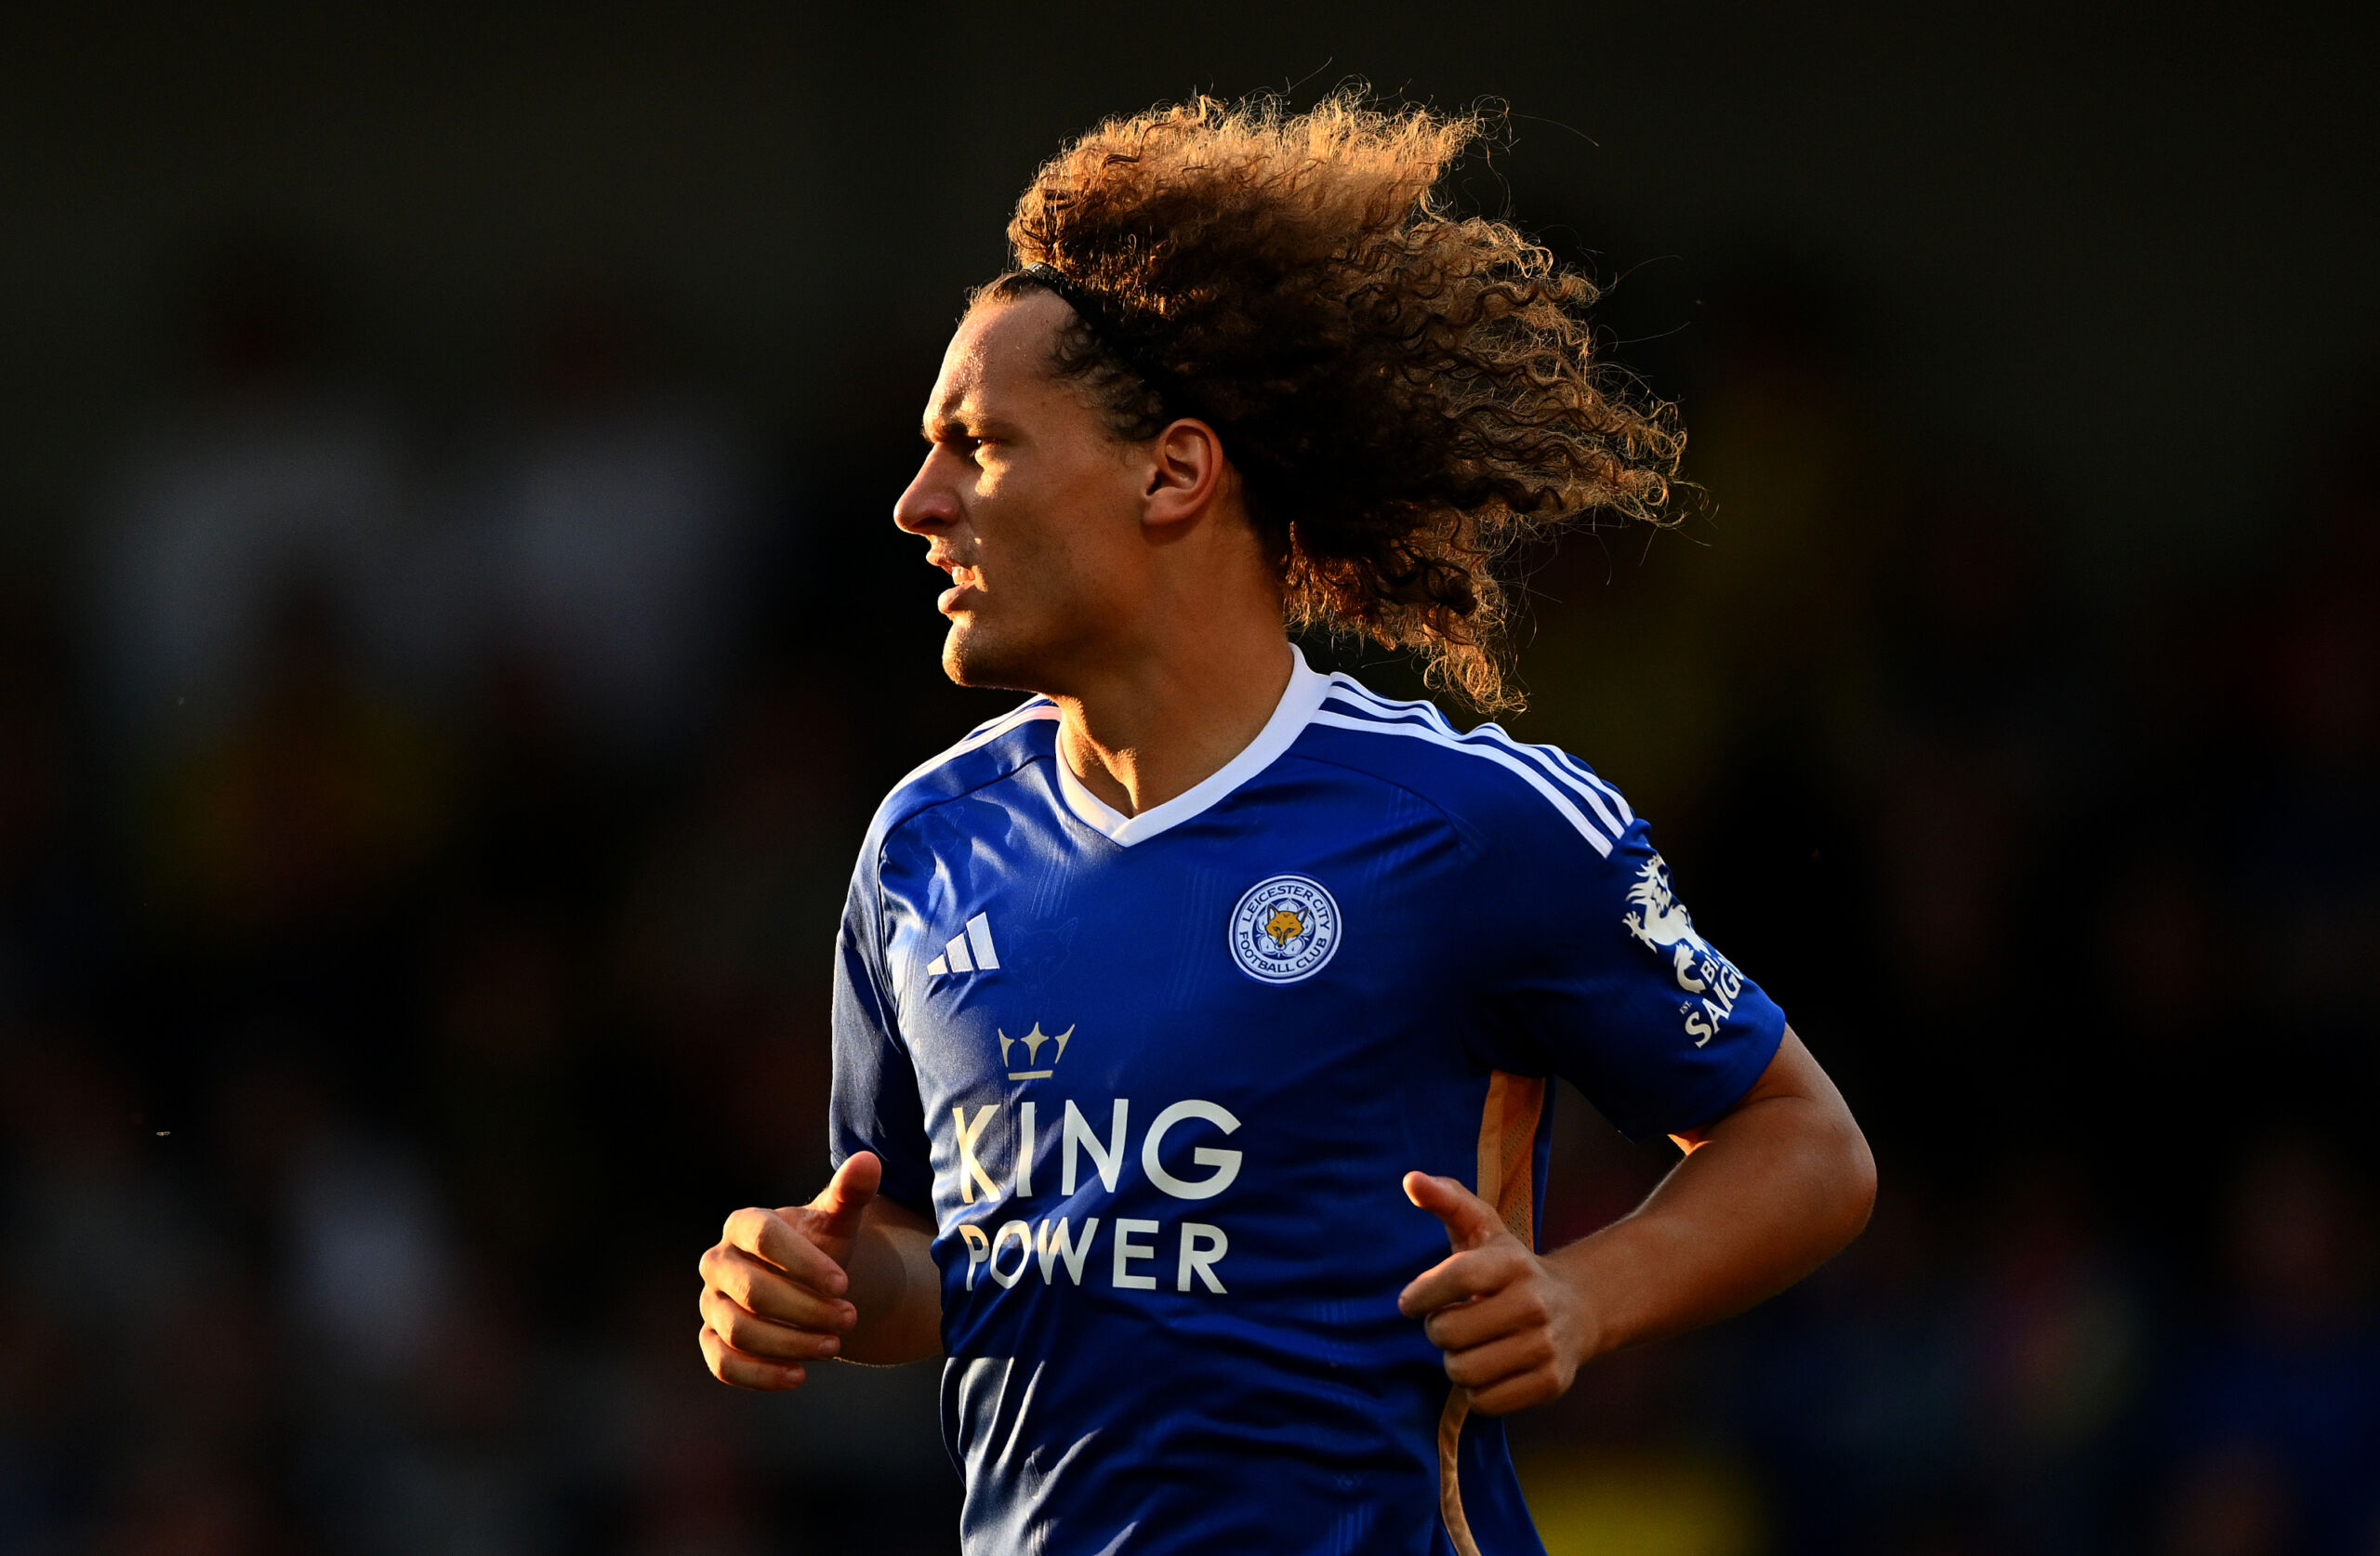 Leicester City transfer news: Wout Faes' ambiguous statement